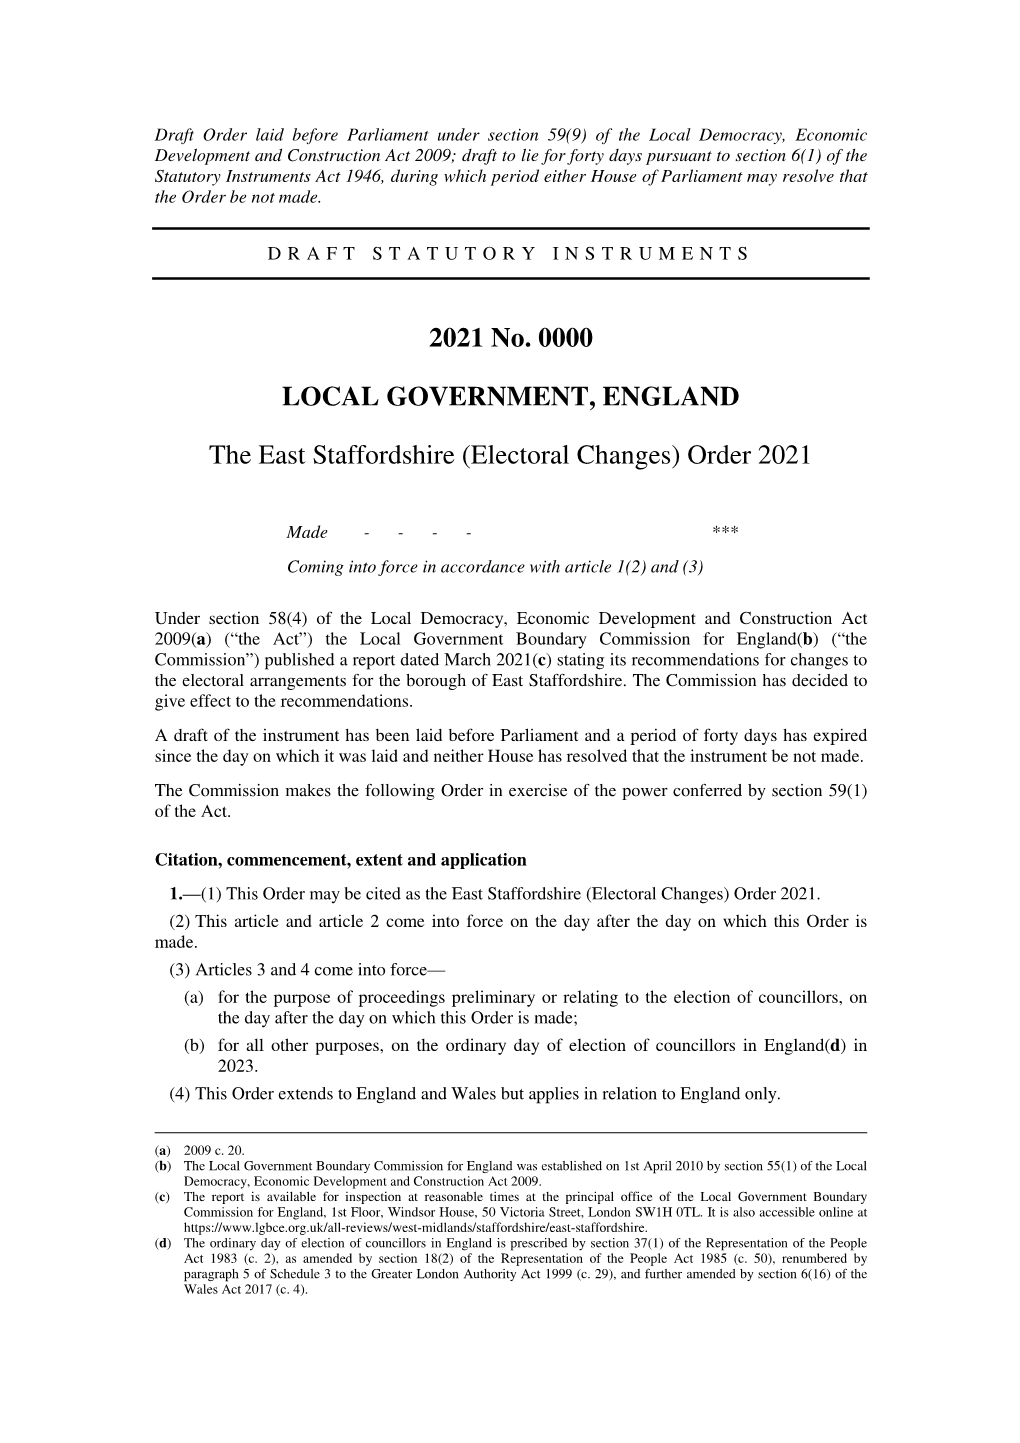 The East Staffordshire (Electoral Changes) Order 2021